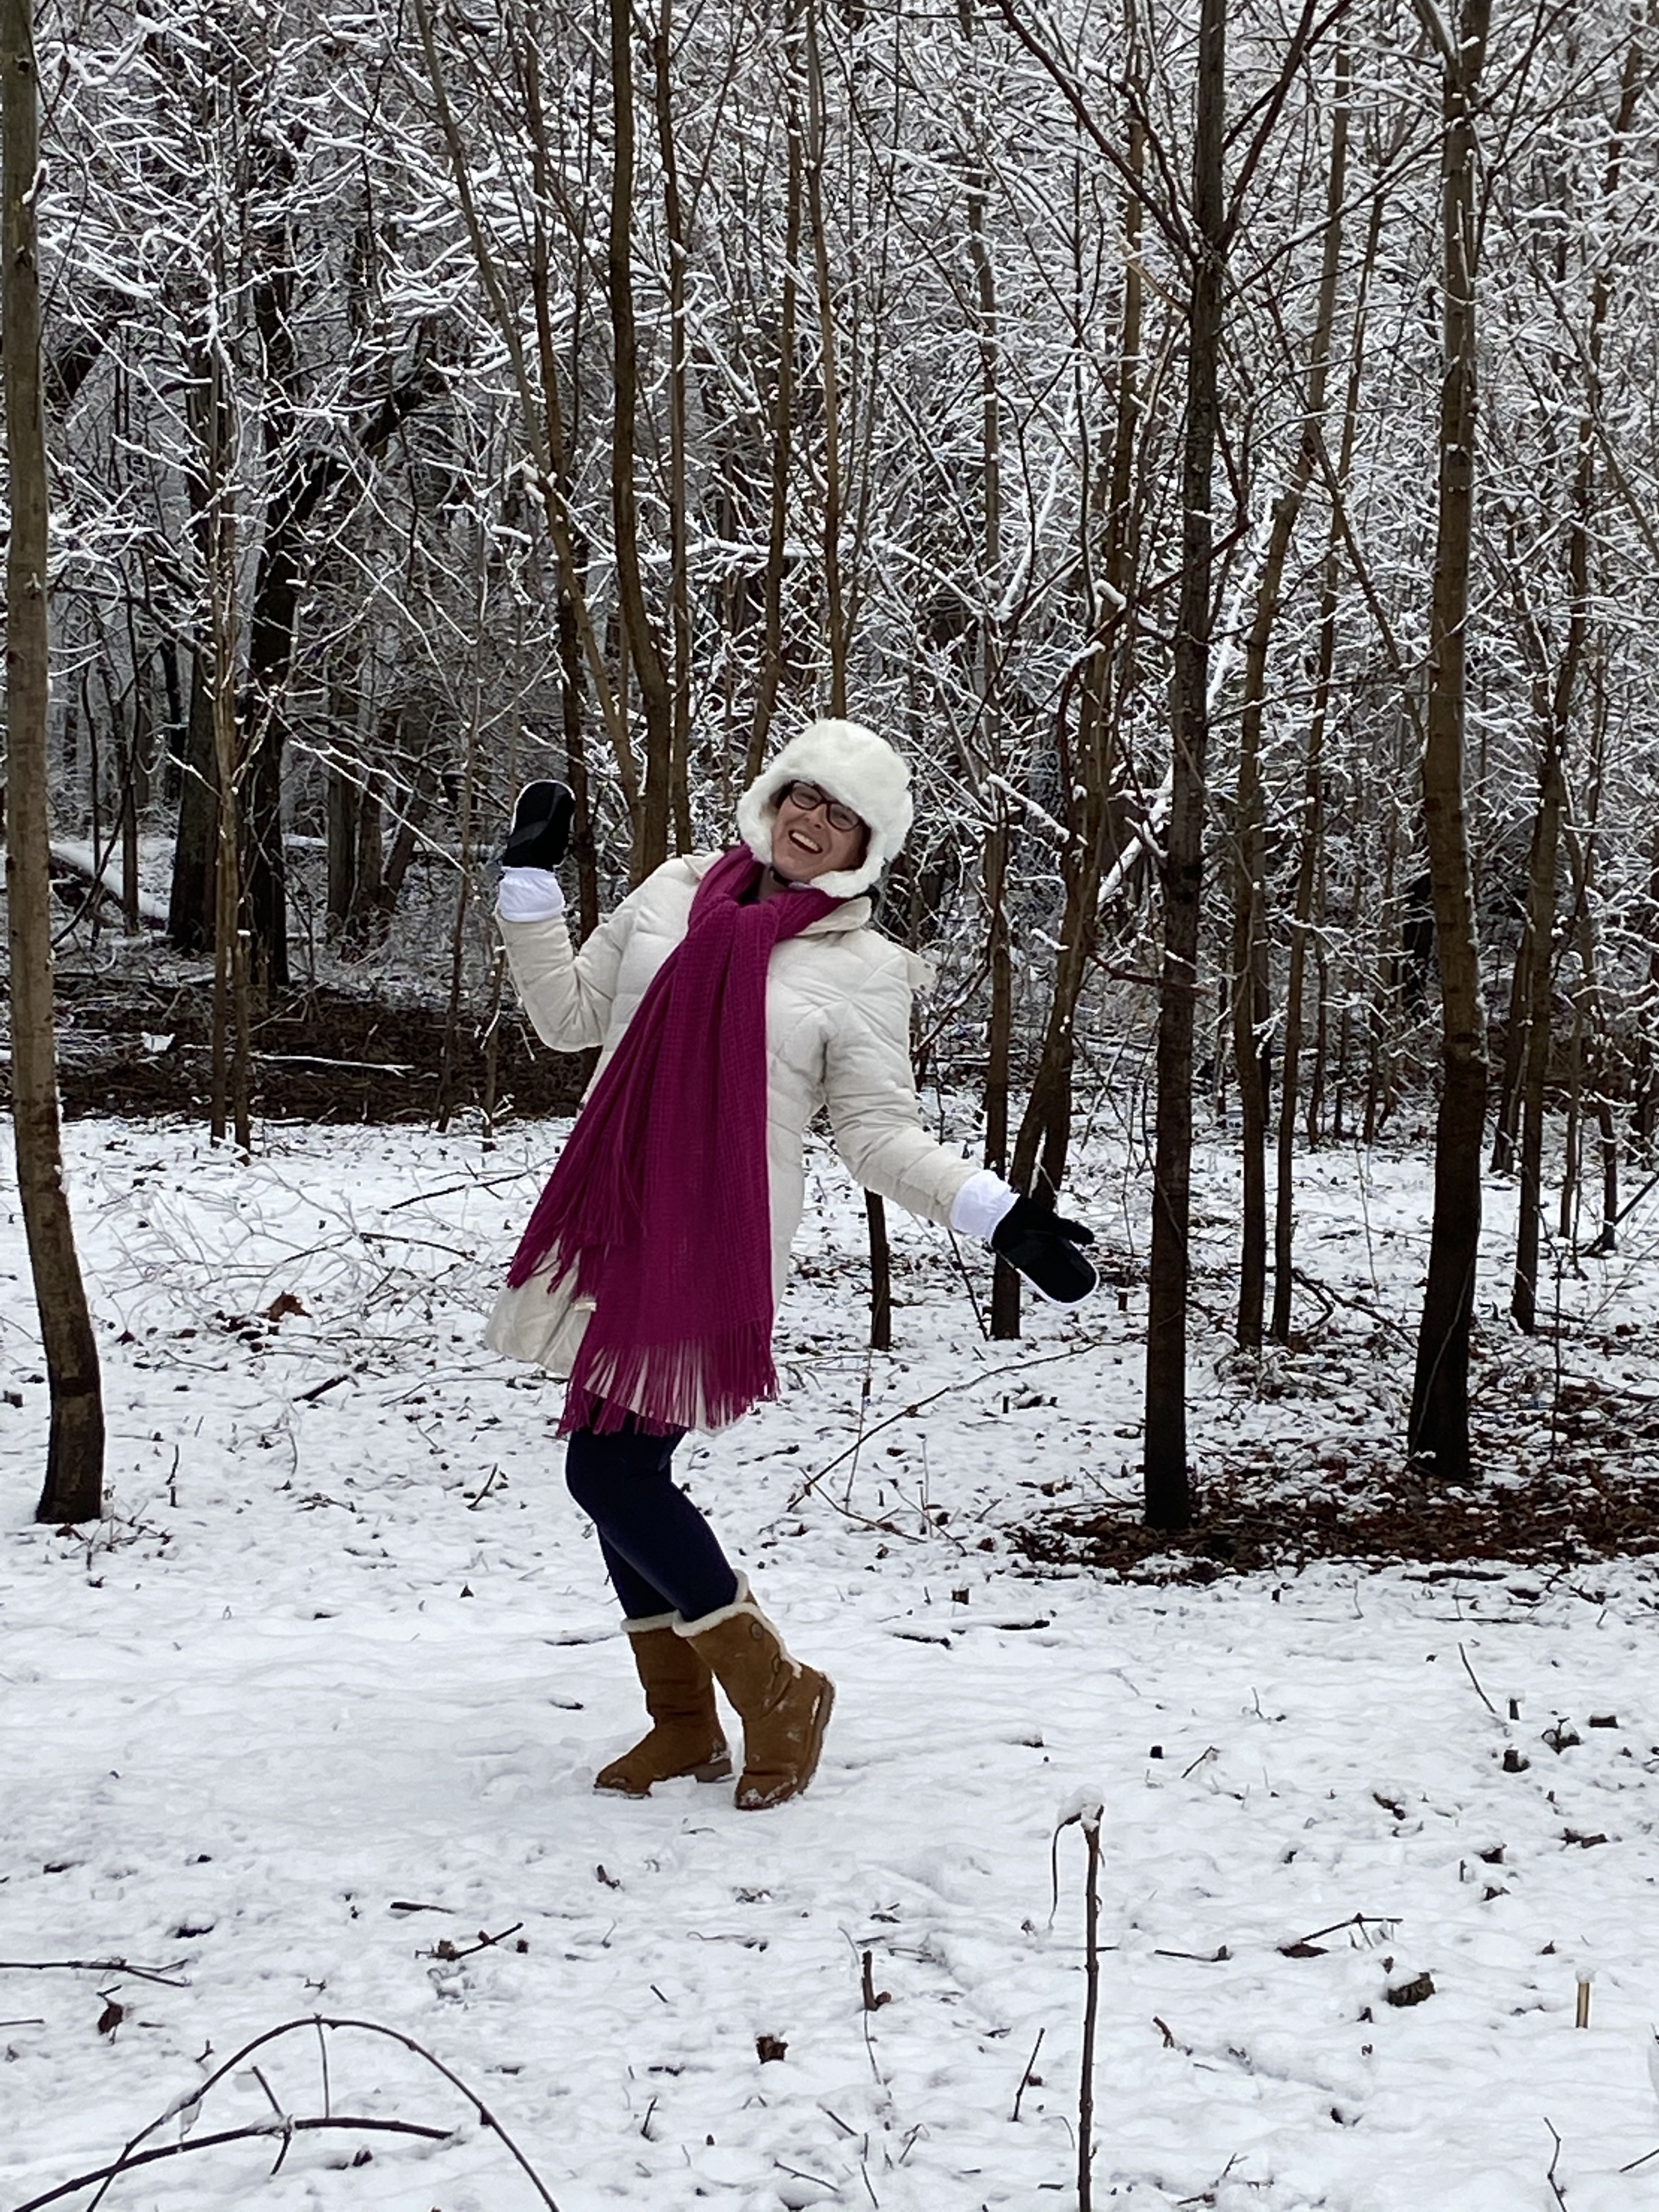 Dressed in cold-weather clothing, including winter boots and a long magenta scarf, Shawna Graddy enjoys a snowy forest landscape.